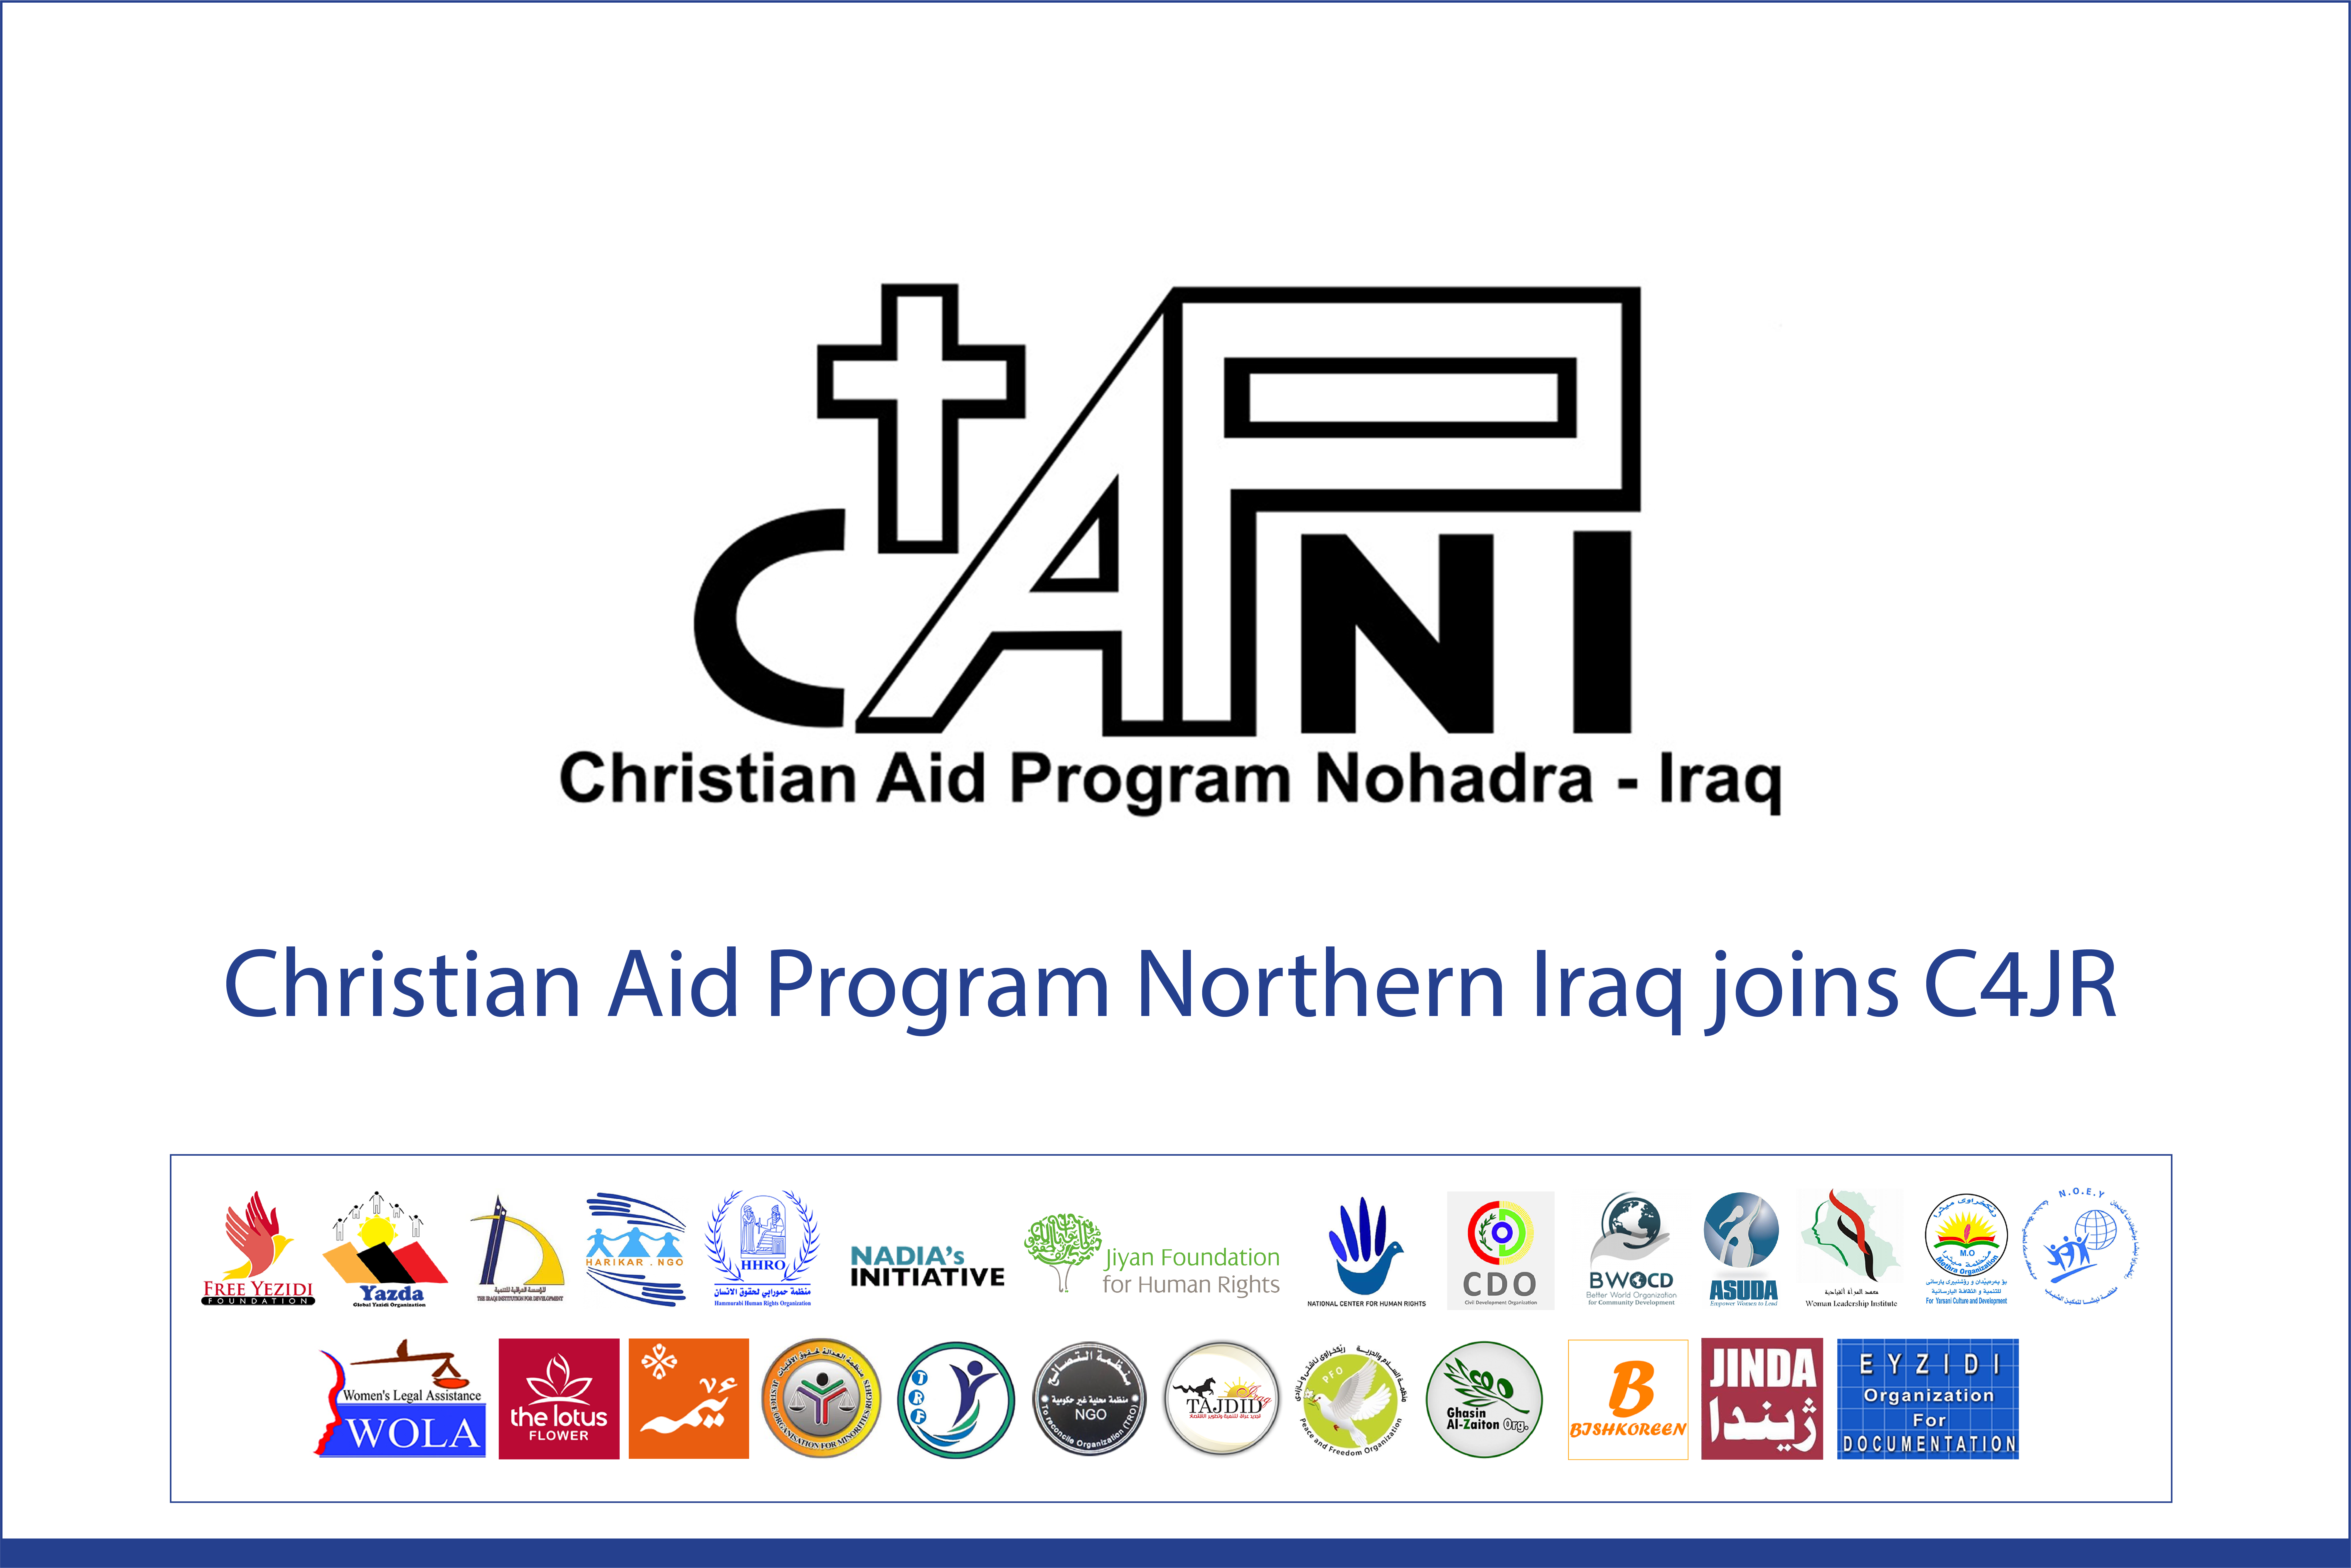 C4JR is welcoming Christian Aid Program Northern Iraq (CAPNI) as the 27th member of the Coalition